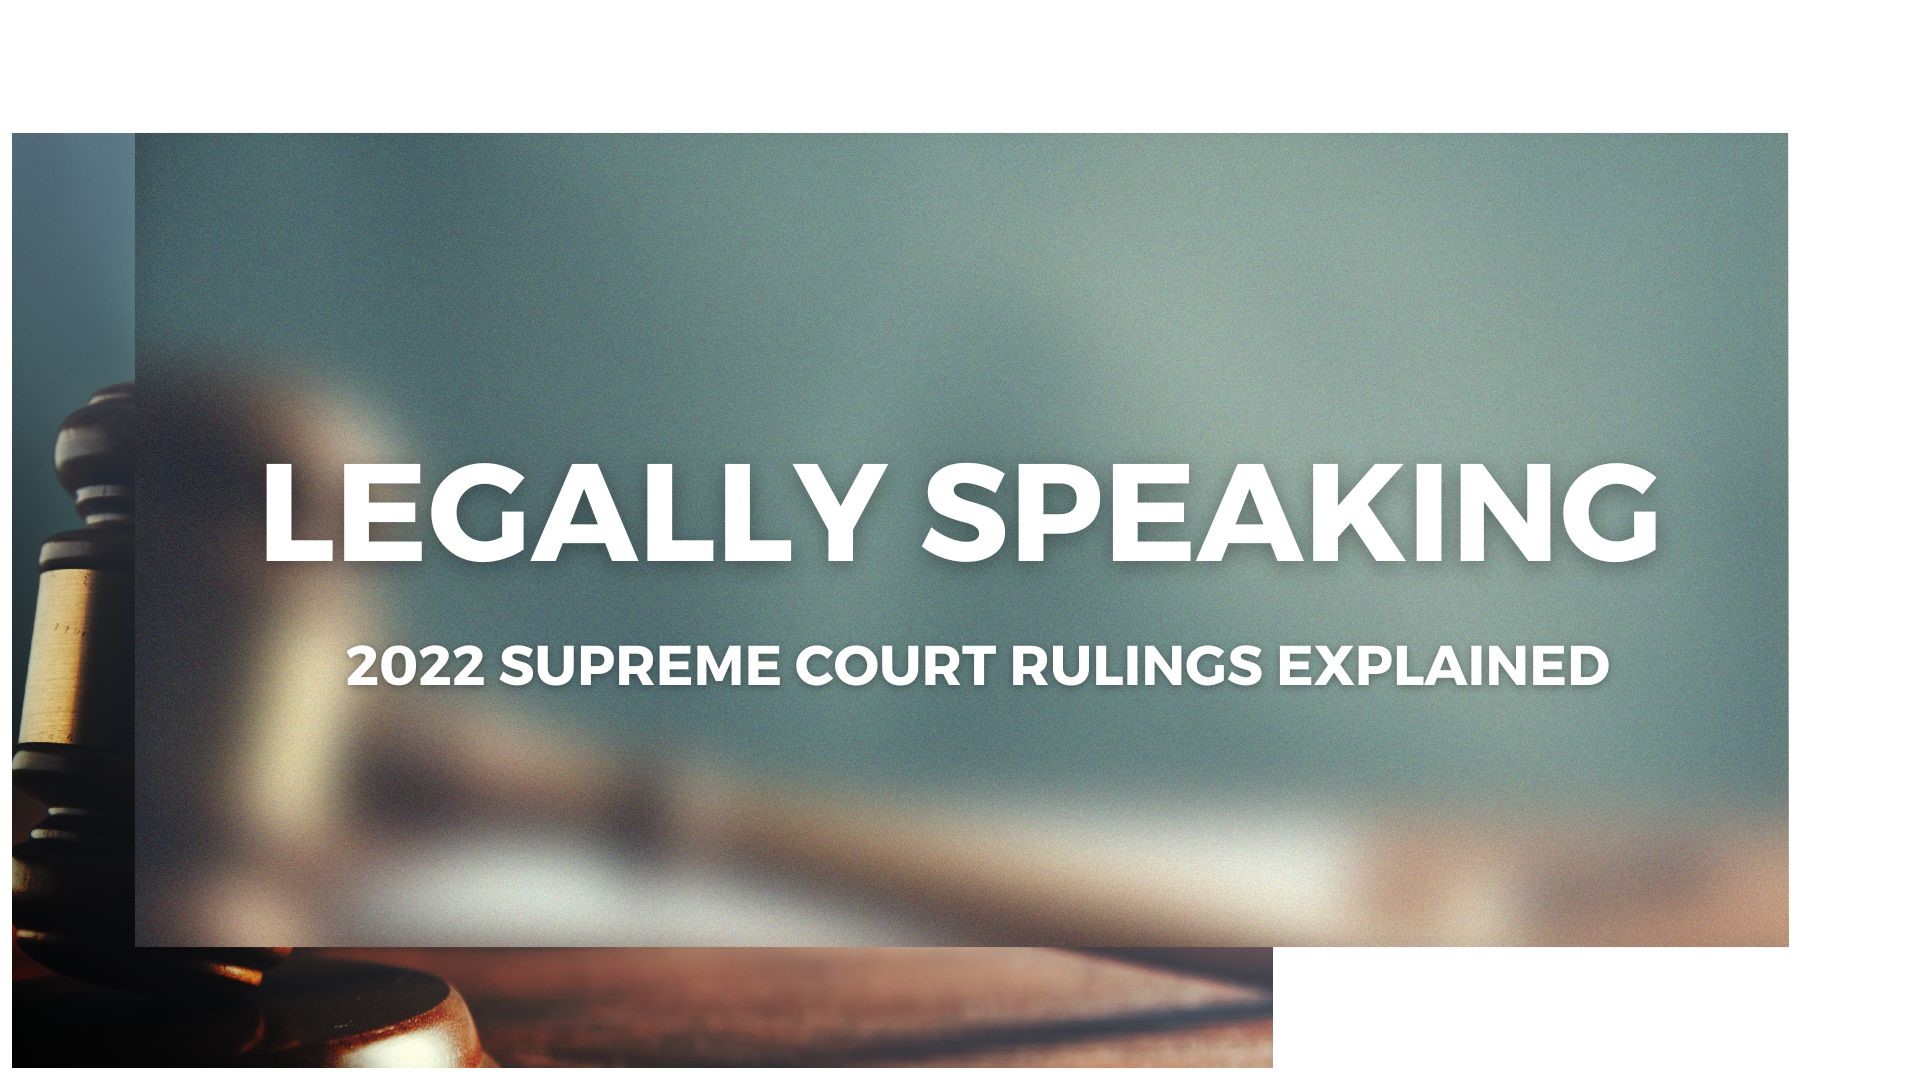 Legal analyst Stephanie Haney breaks down some of the major rulings out of the Supreme Court in 2022, including topics such as immigration and religion in schools.